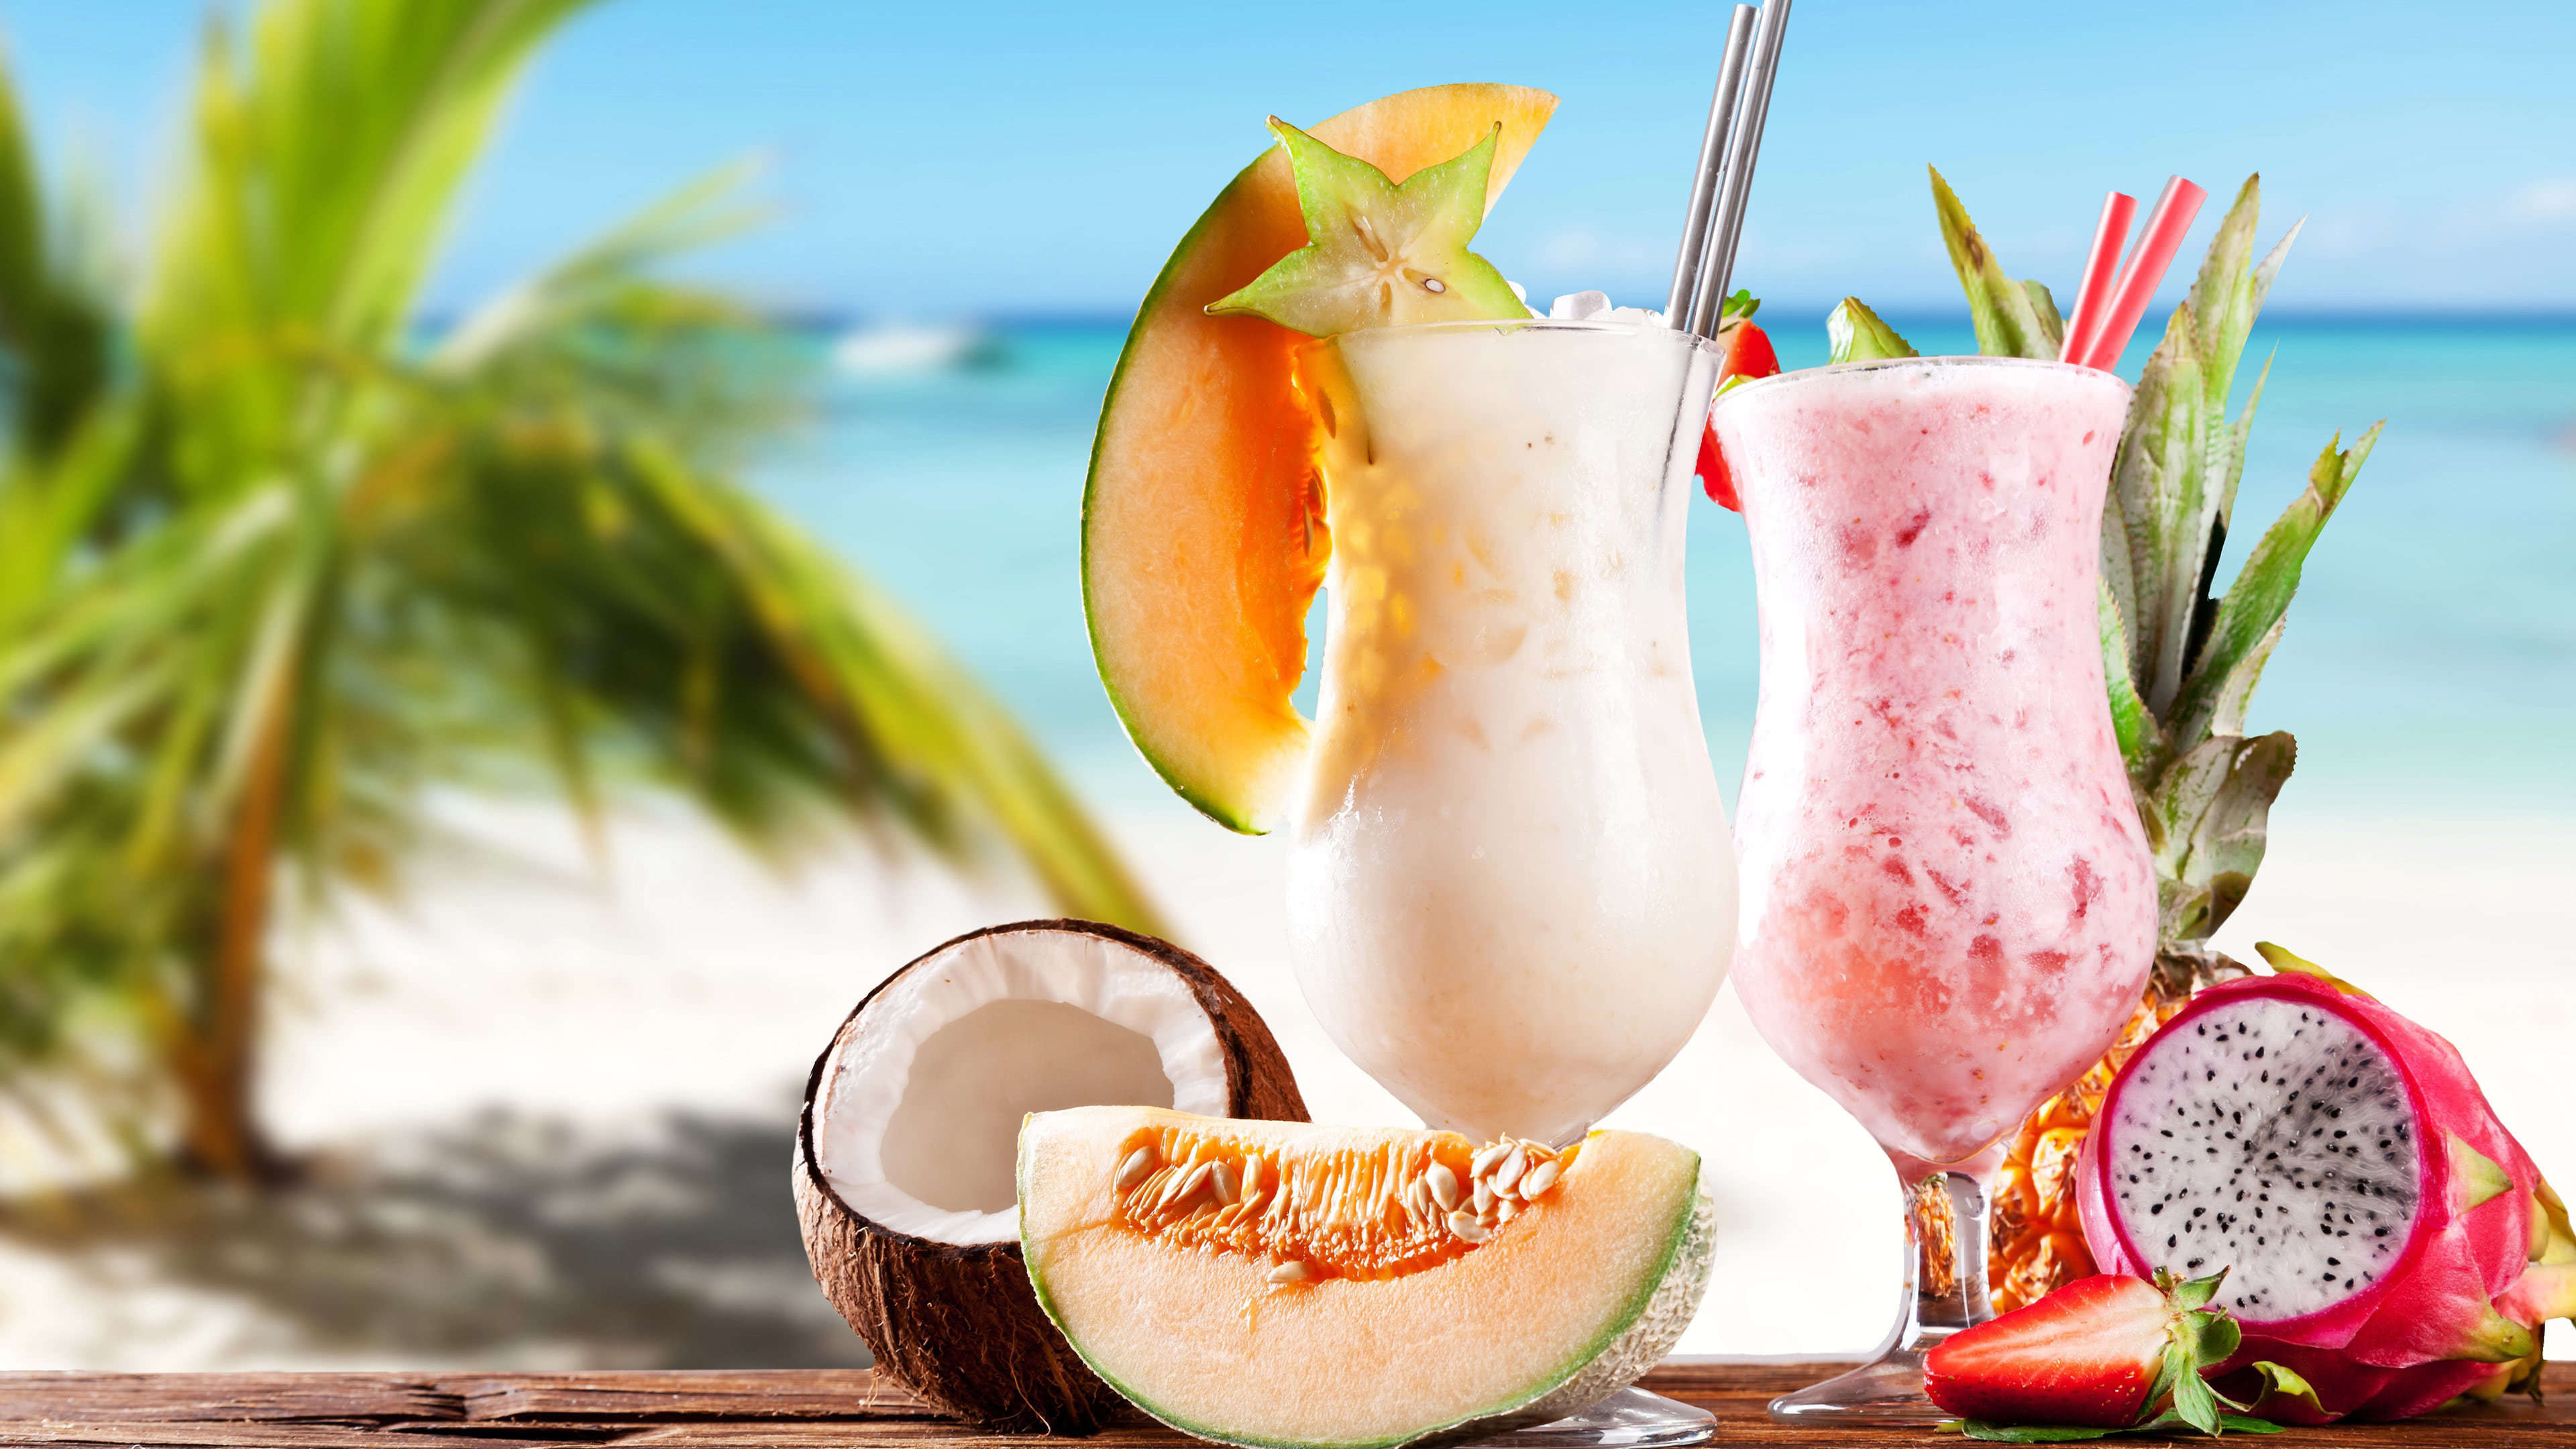 Coconut: Beach, Fruit, Cocktails, A large hairy, brown nut. 3840x2160 4K Background.